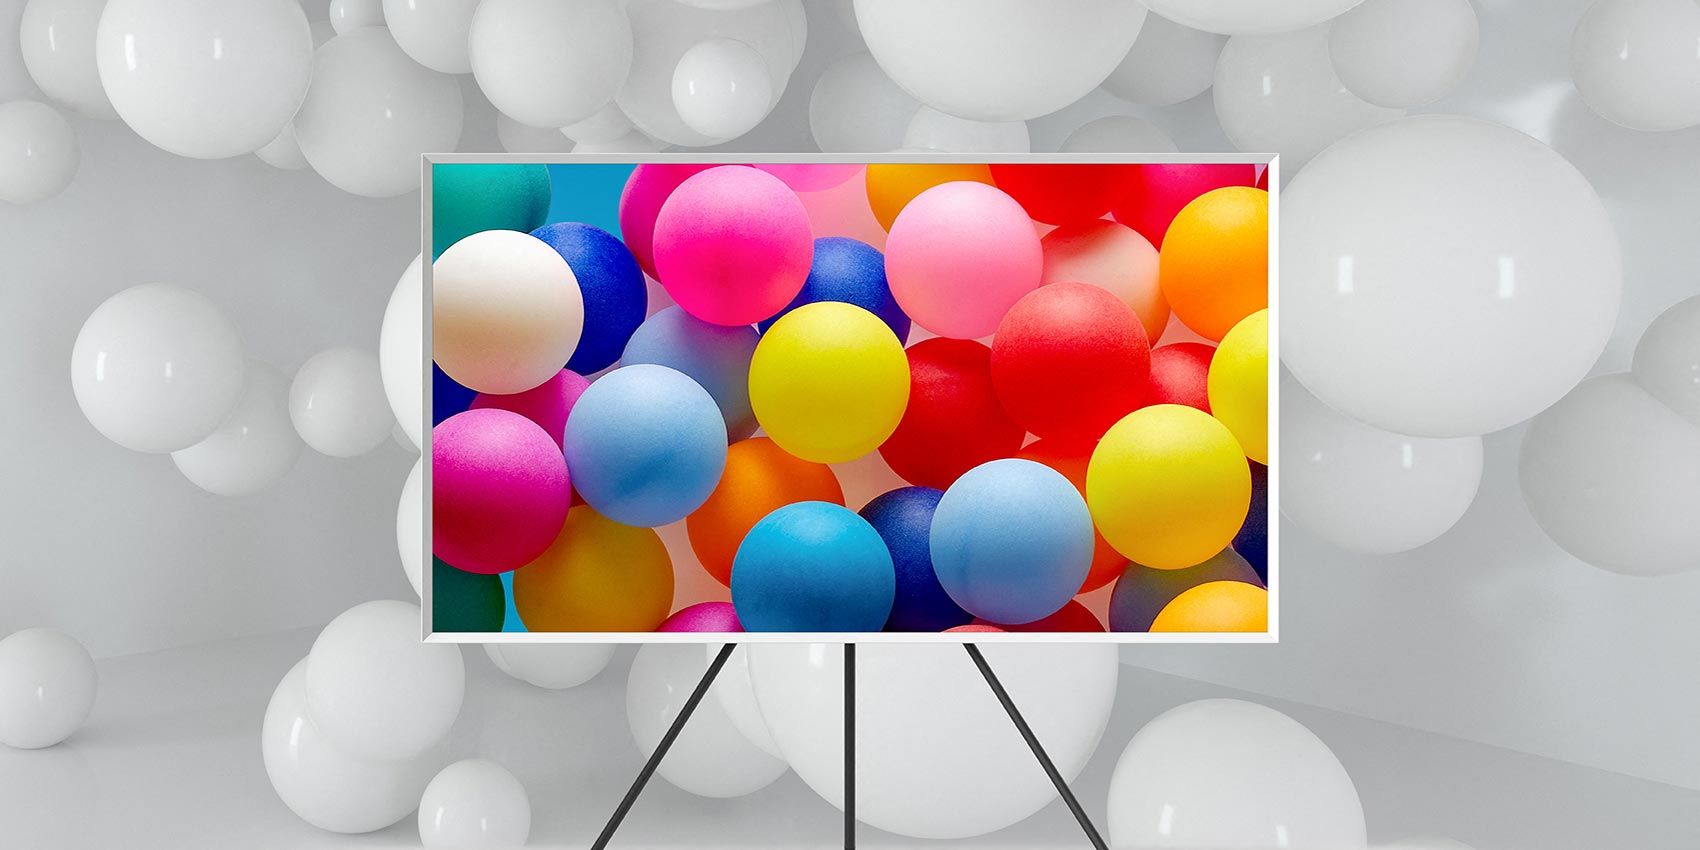 Samsung Frame TV in room with white balloons, colorful balloons